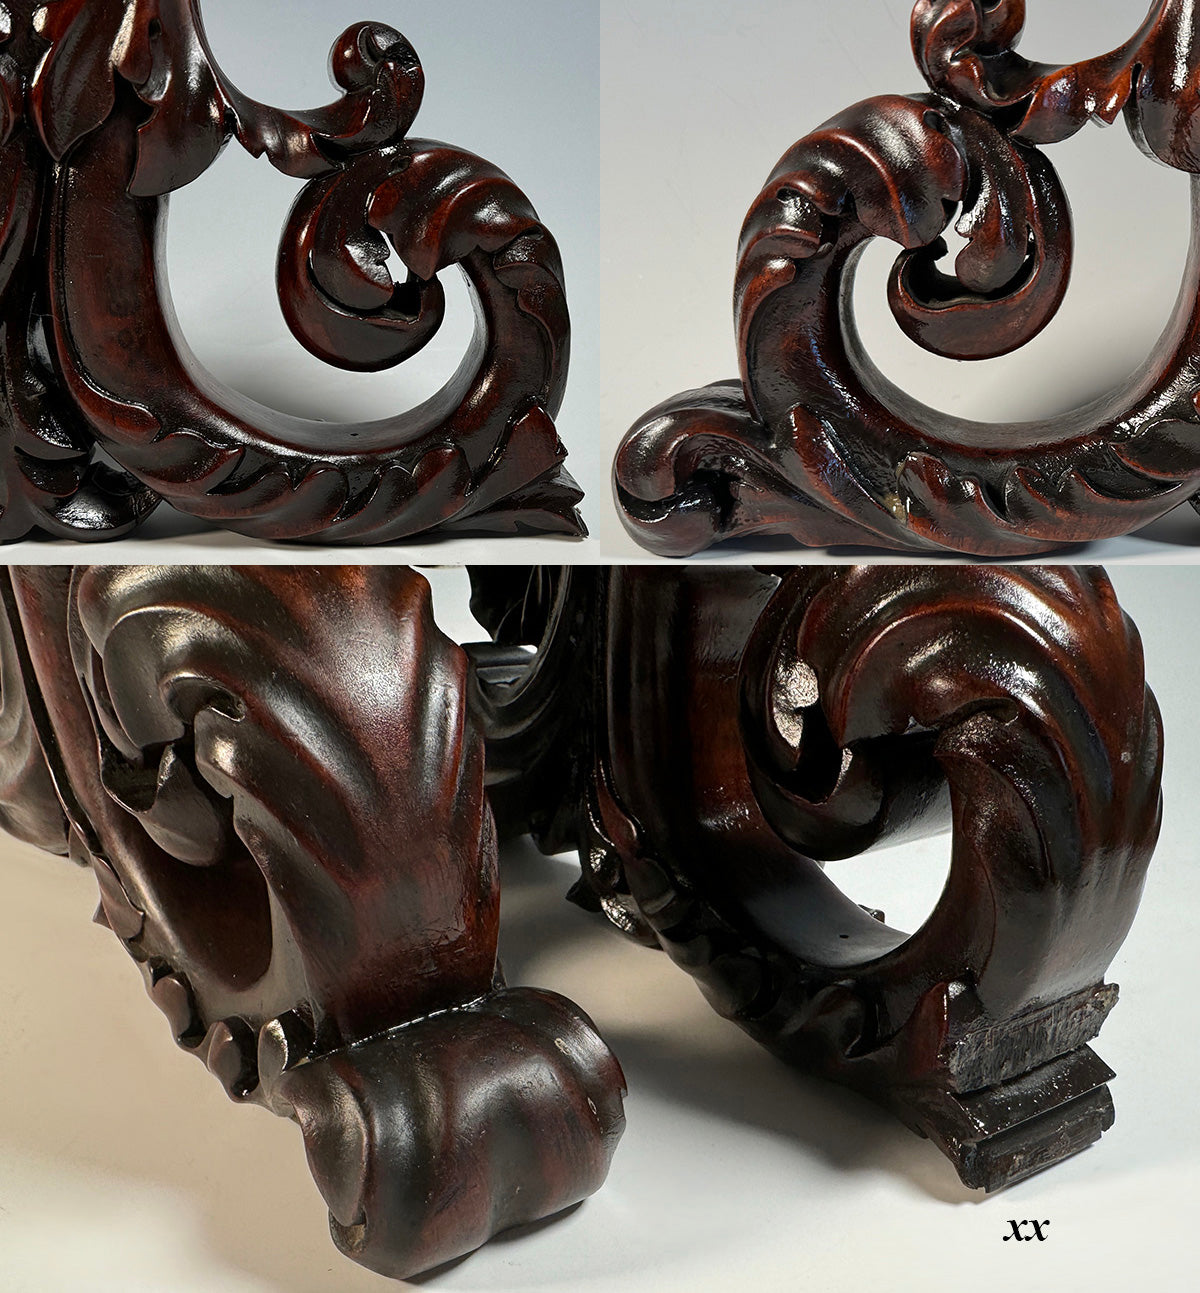 Pair Antique French Neoclassical Hand Carved Wood Figures, Shelf or Furniture Brackets, Chimera